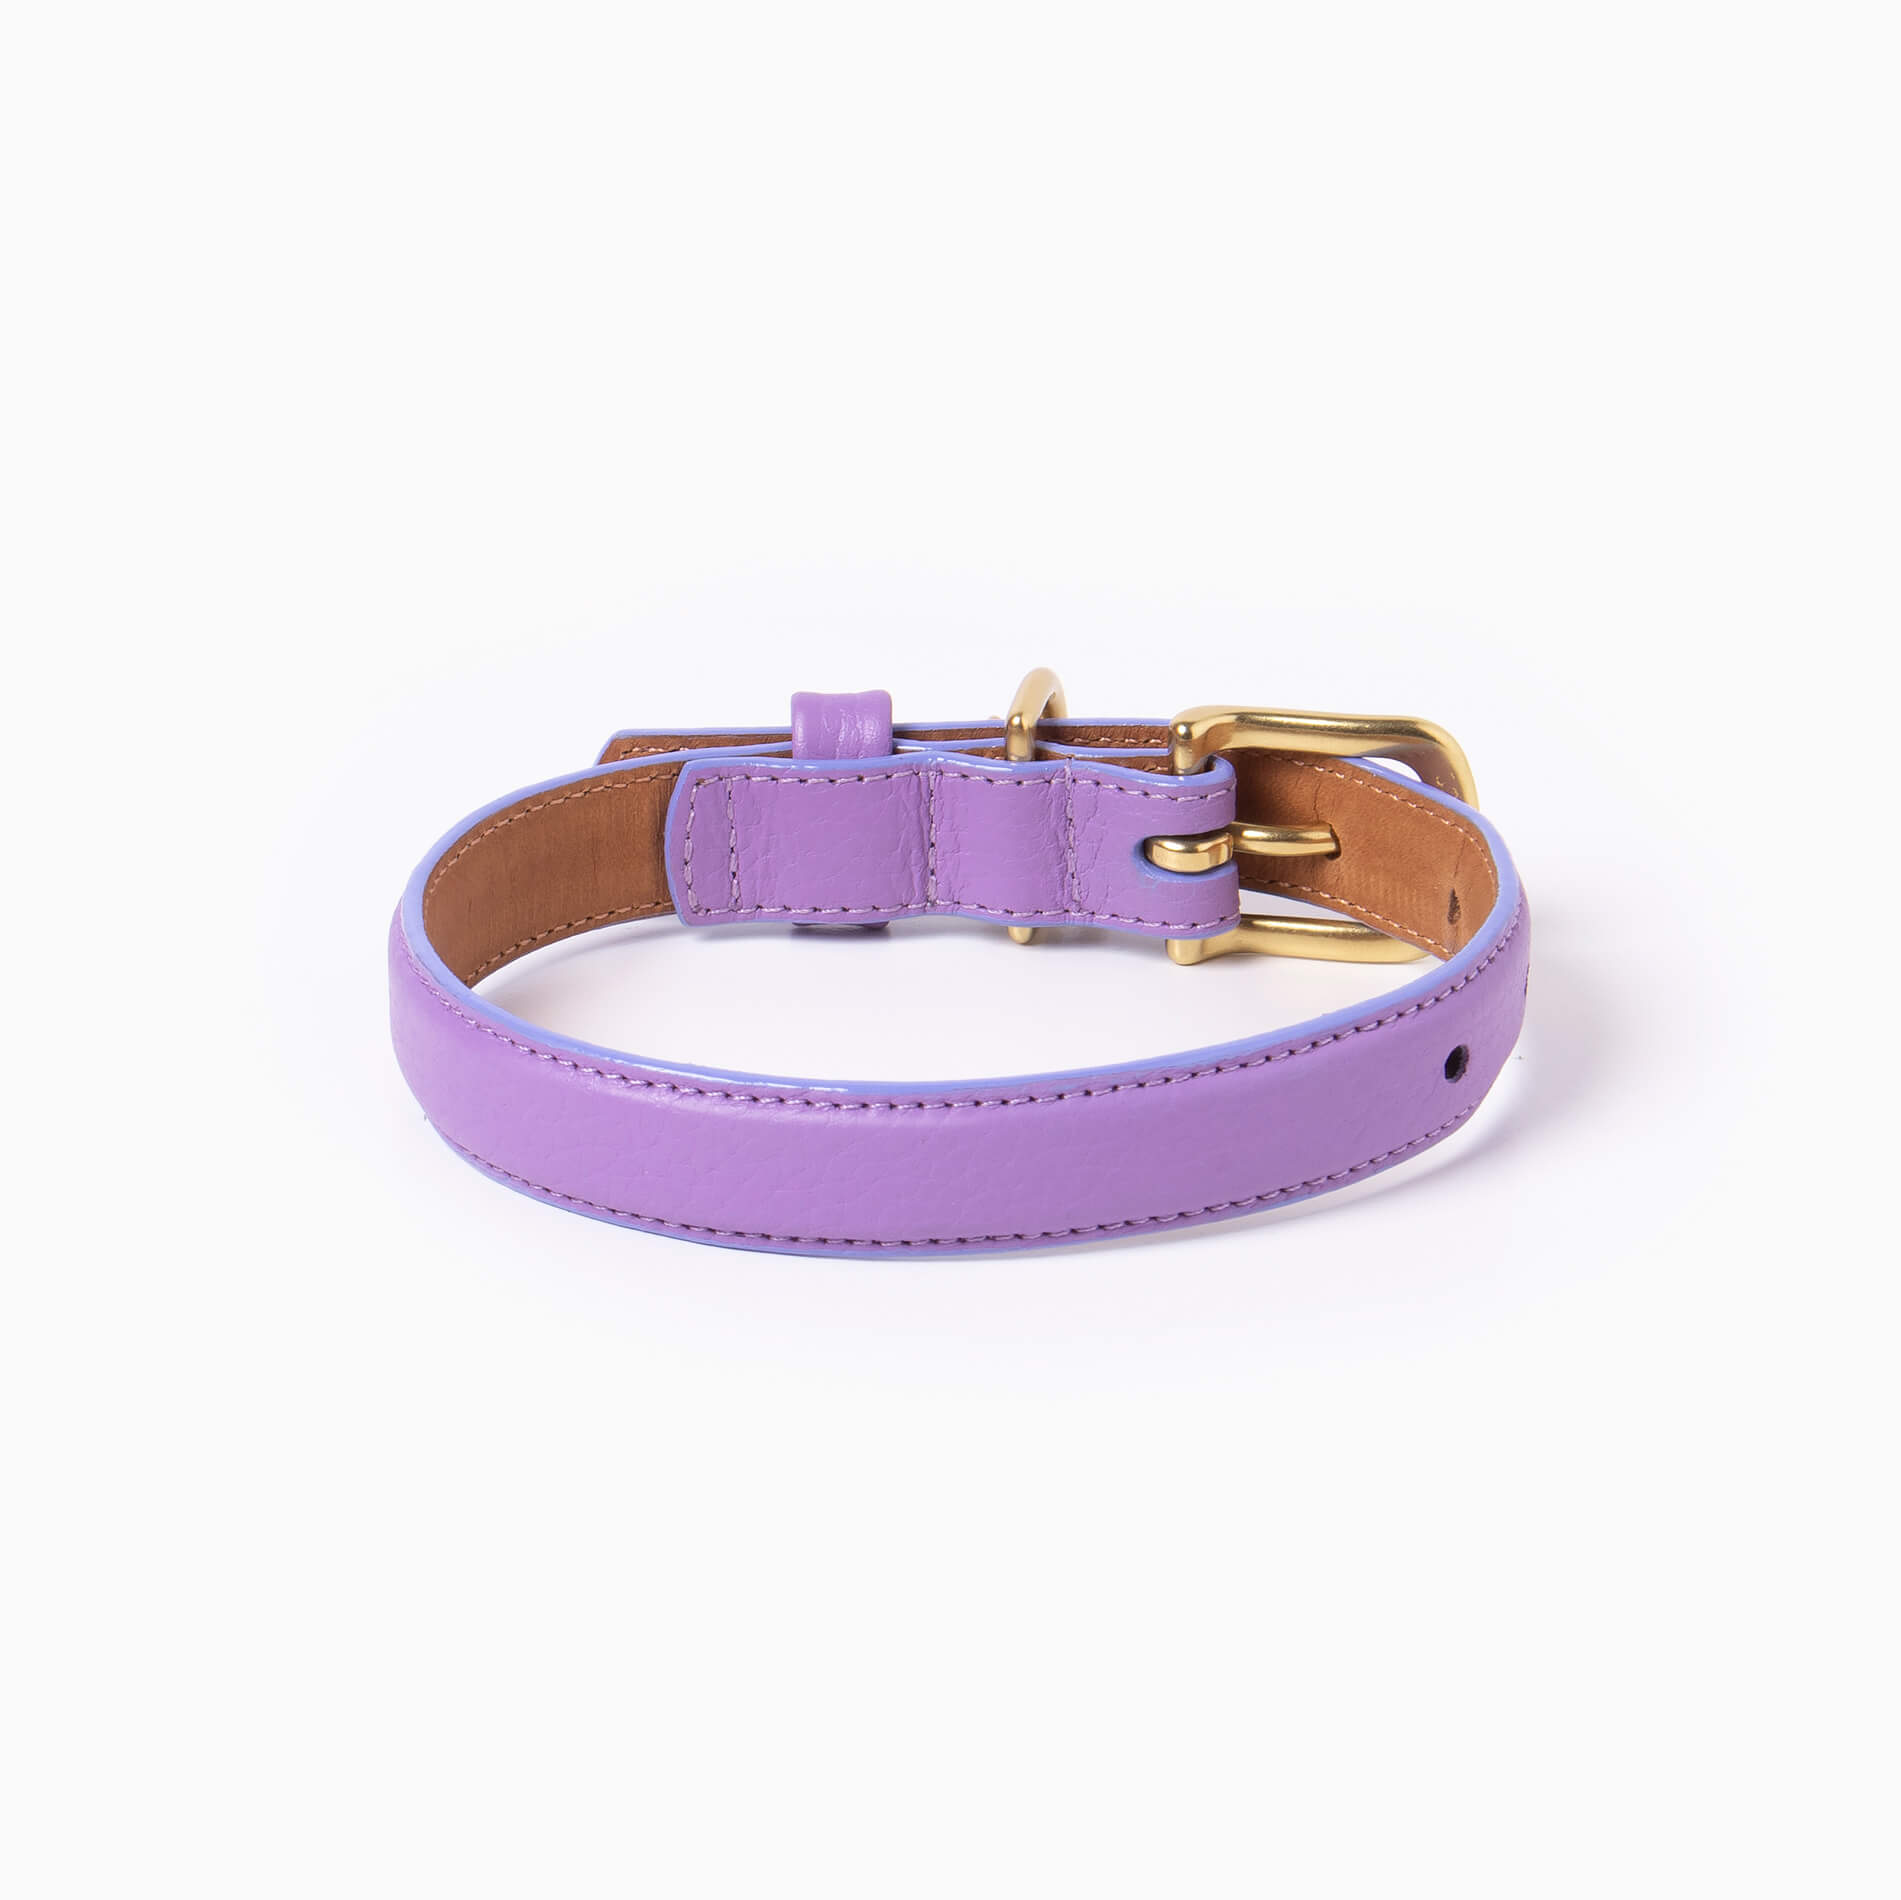 Lilac leather dog collar with with brass hardware and tag ID. Luxury dog collar.